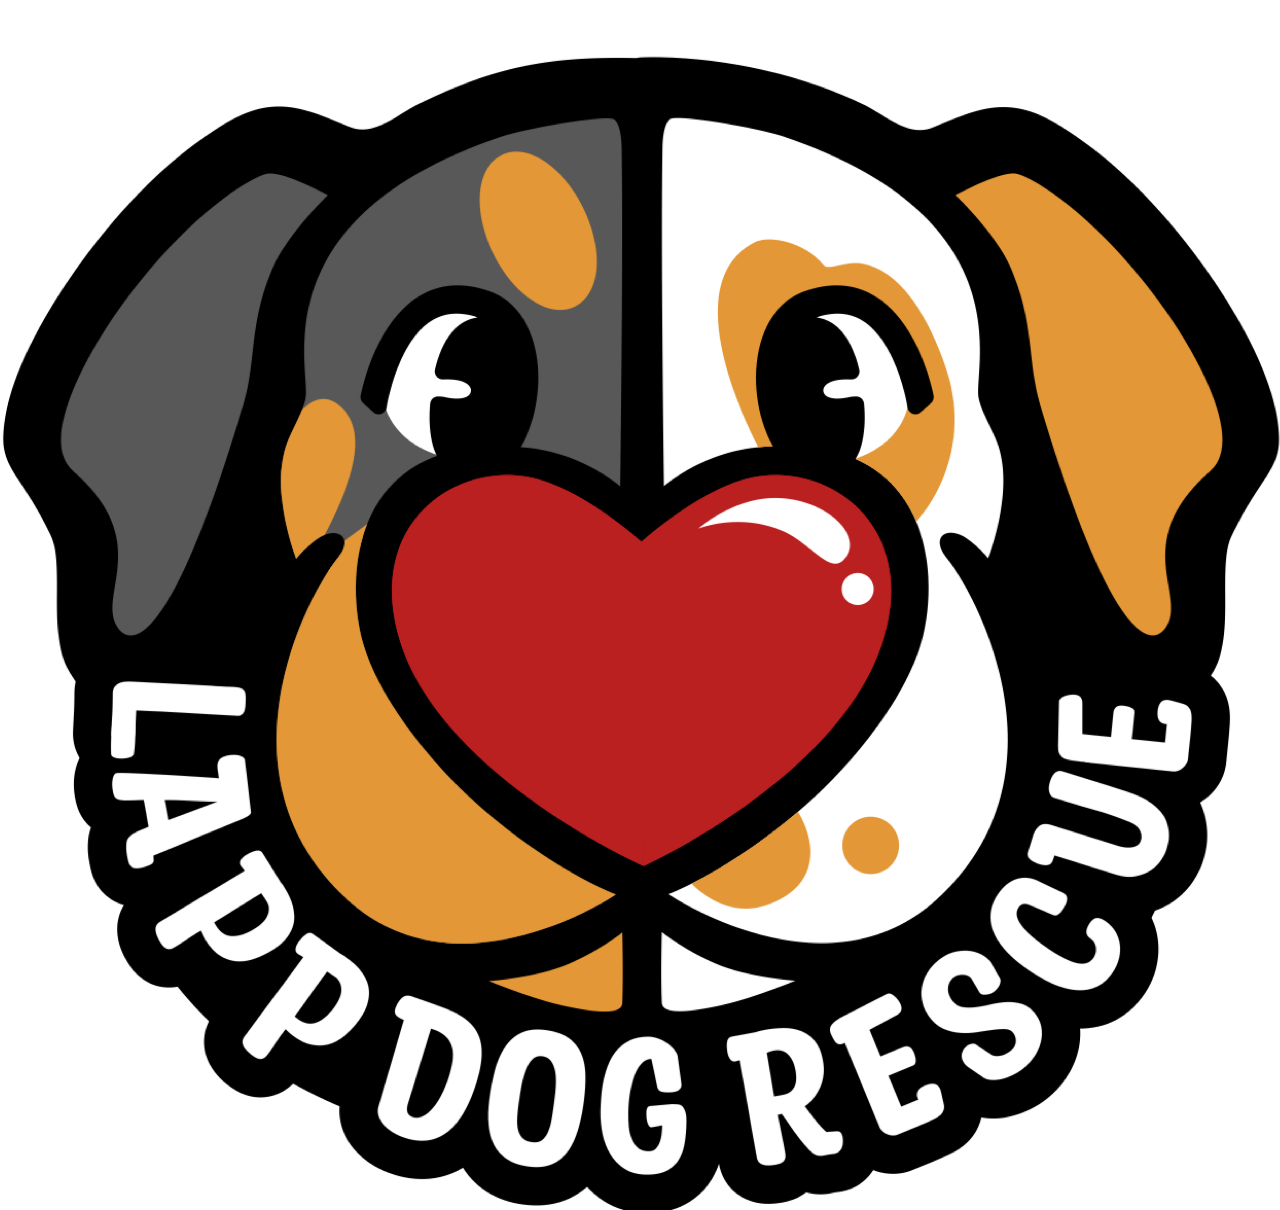 Love And Puppy Paws Dog Rescue